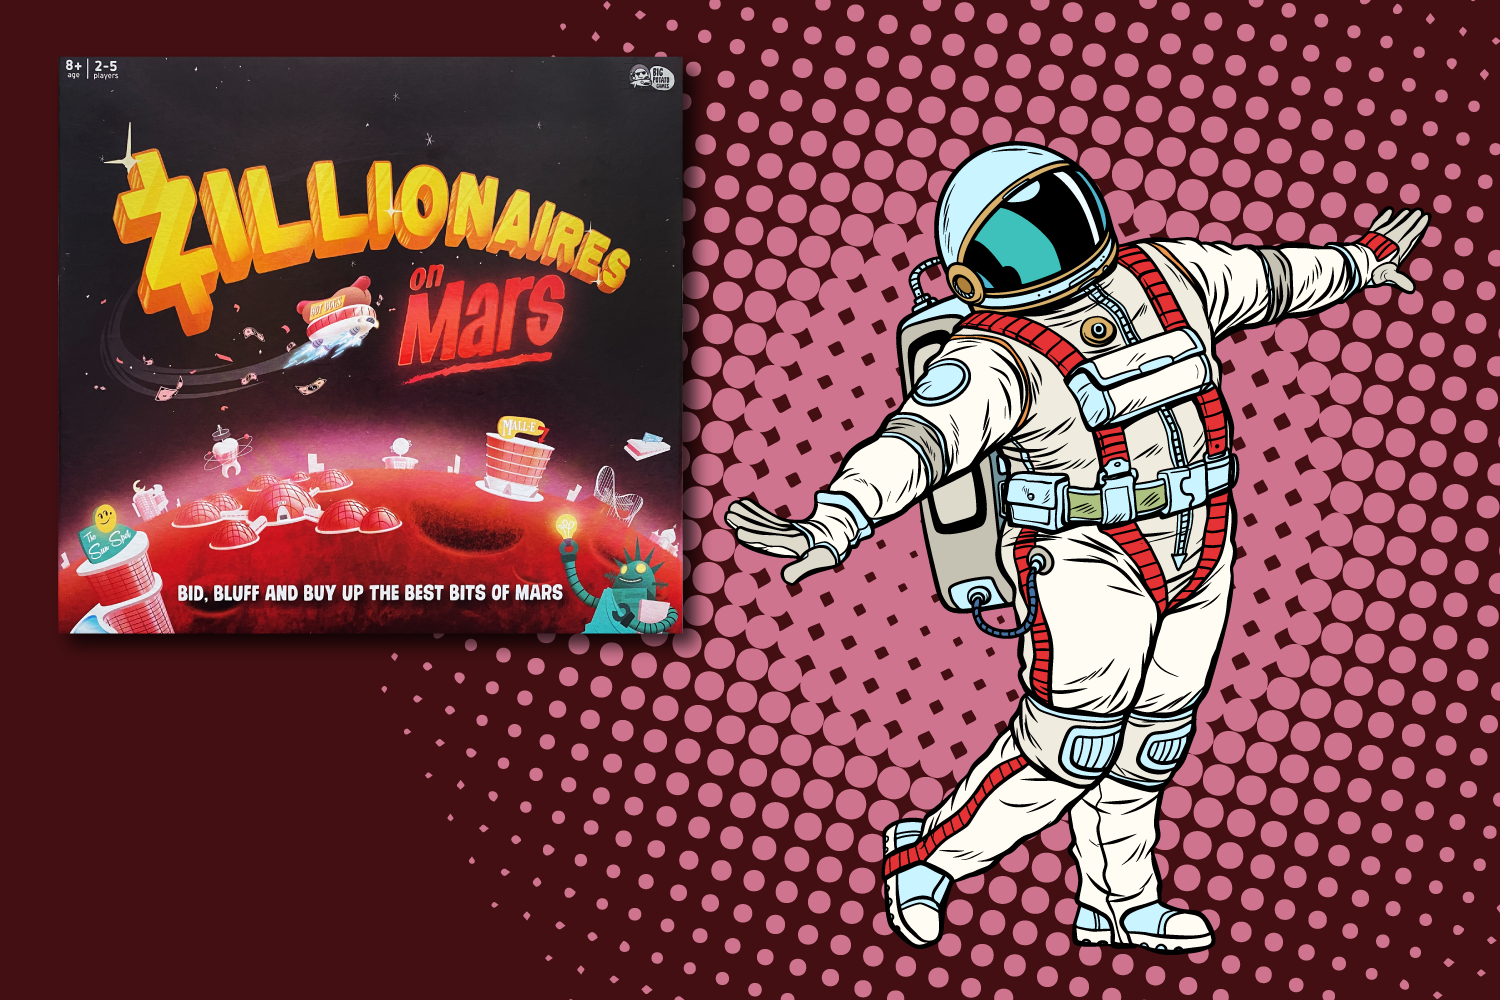 Zillionaires-on-Mars-Board-Game-Review